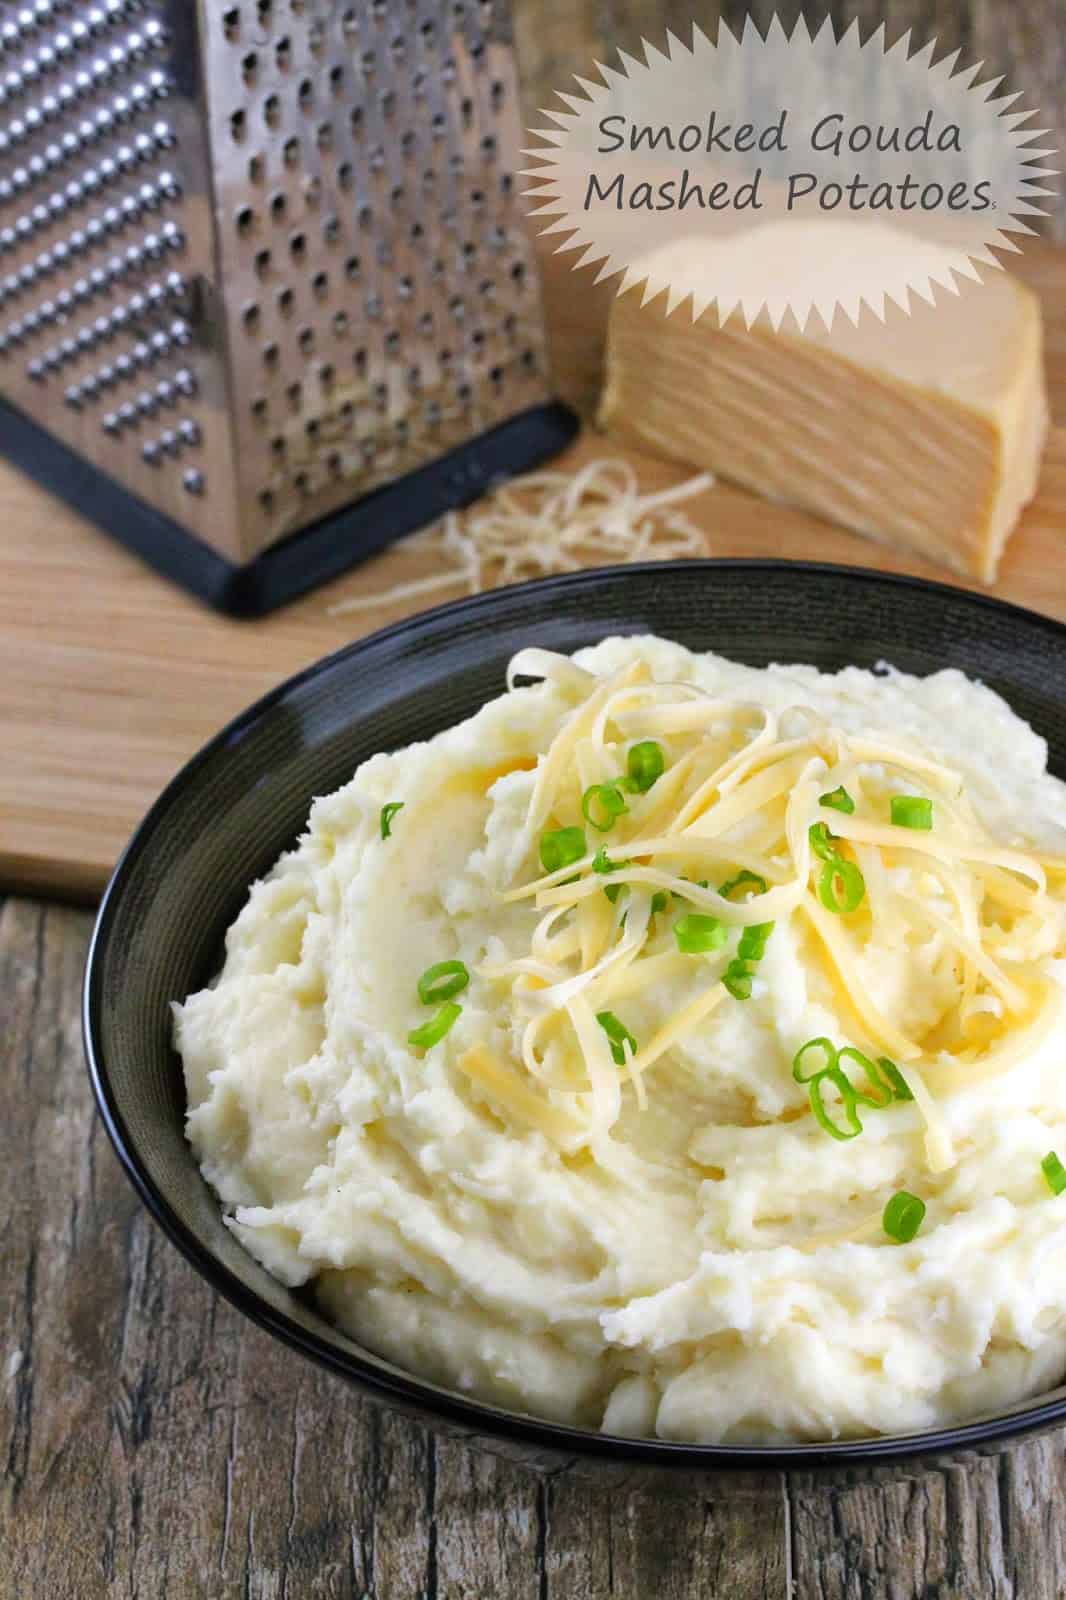 Smoked Gouda Mashed Potatoes served up with some freshly grated smoked gouda and chopped green onion